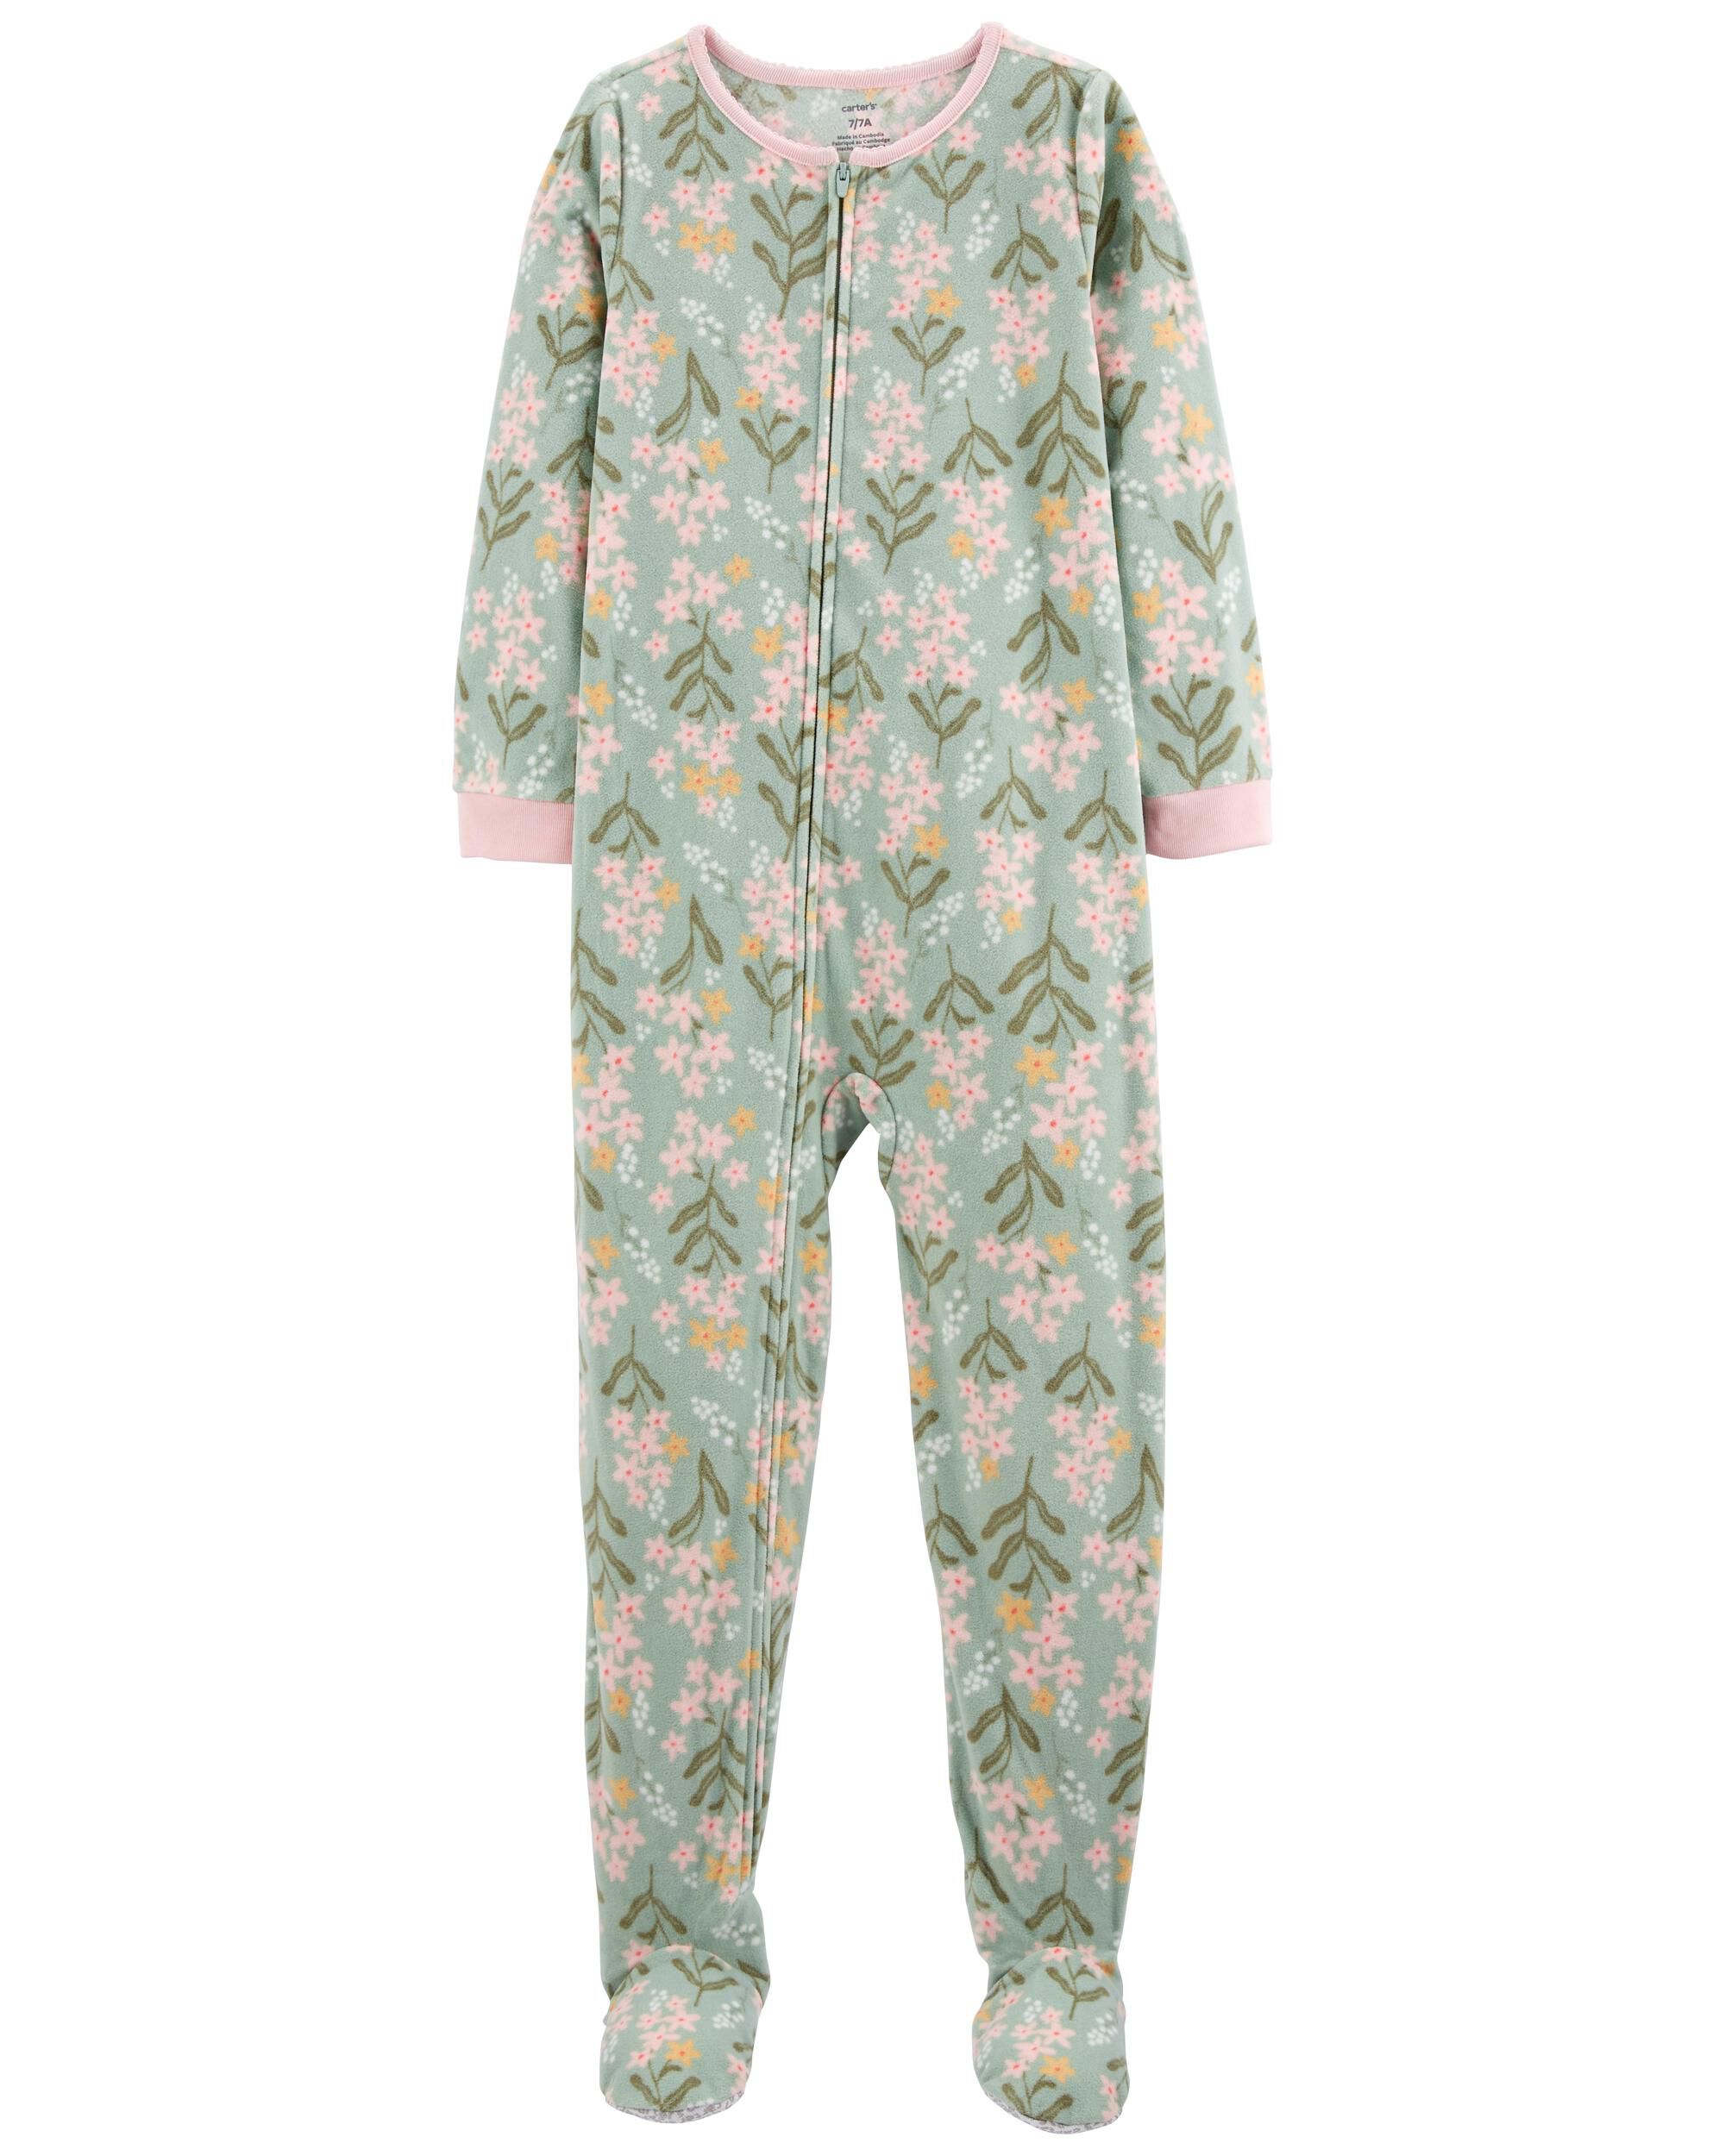 Details about   NWT Baby Girl Size NB Just One You/Carter's Christmas Fleece Footed Sleeper 